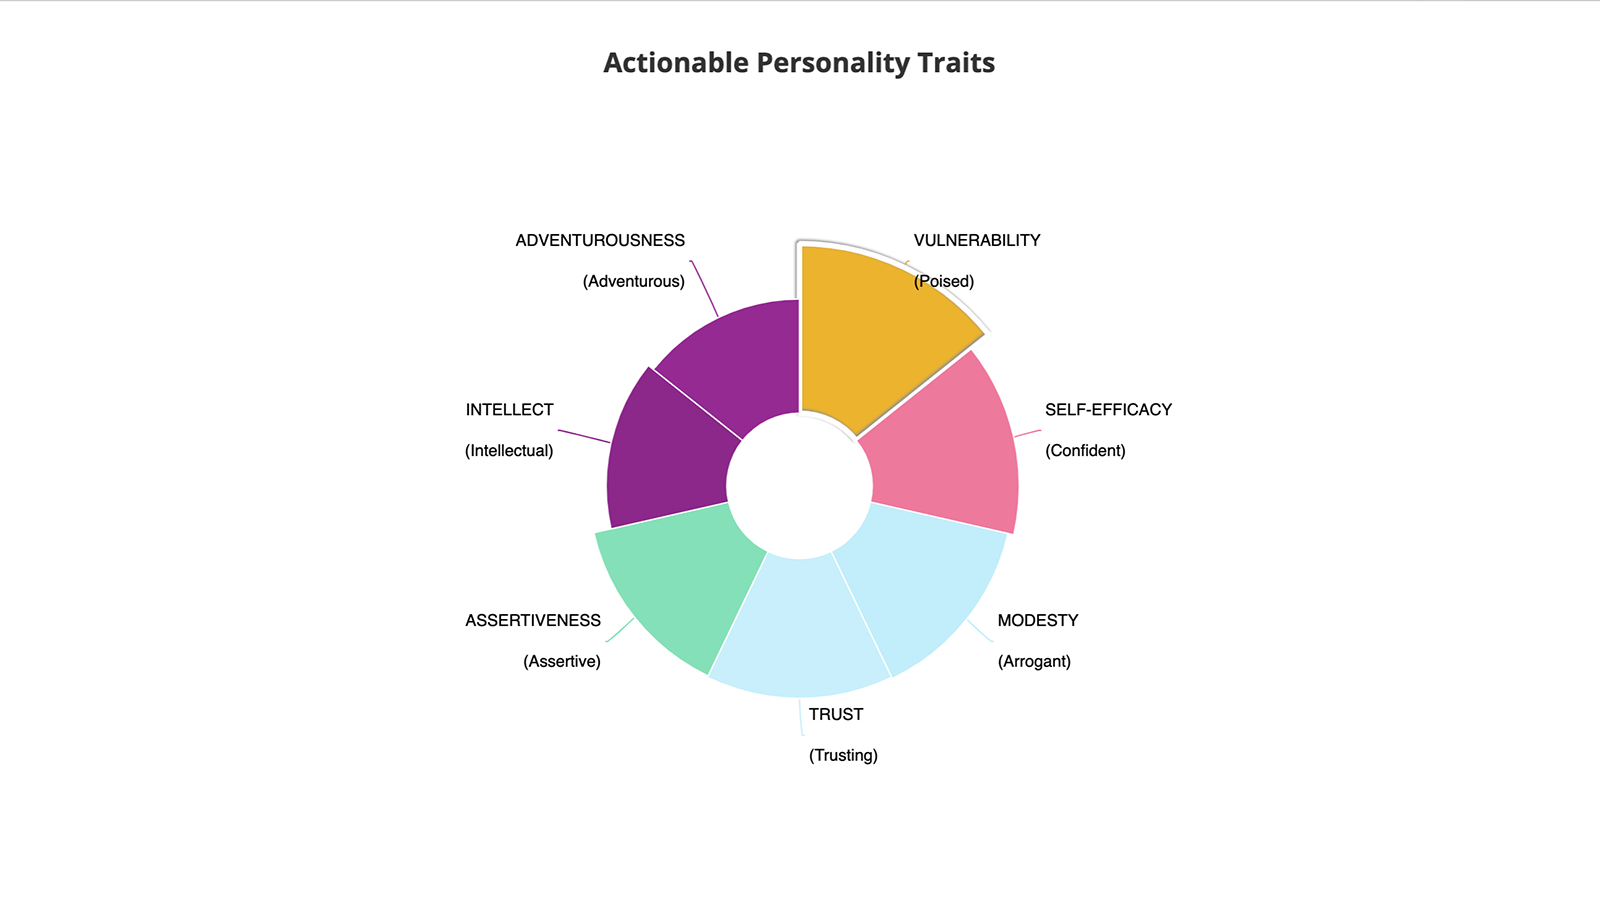 Actionable Personality Traits (top 7)